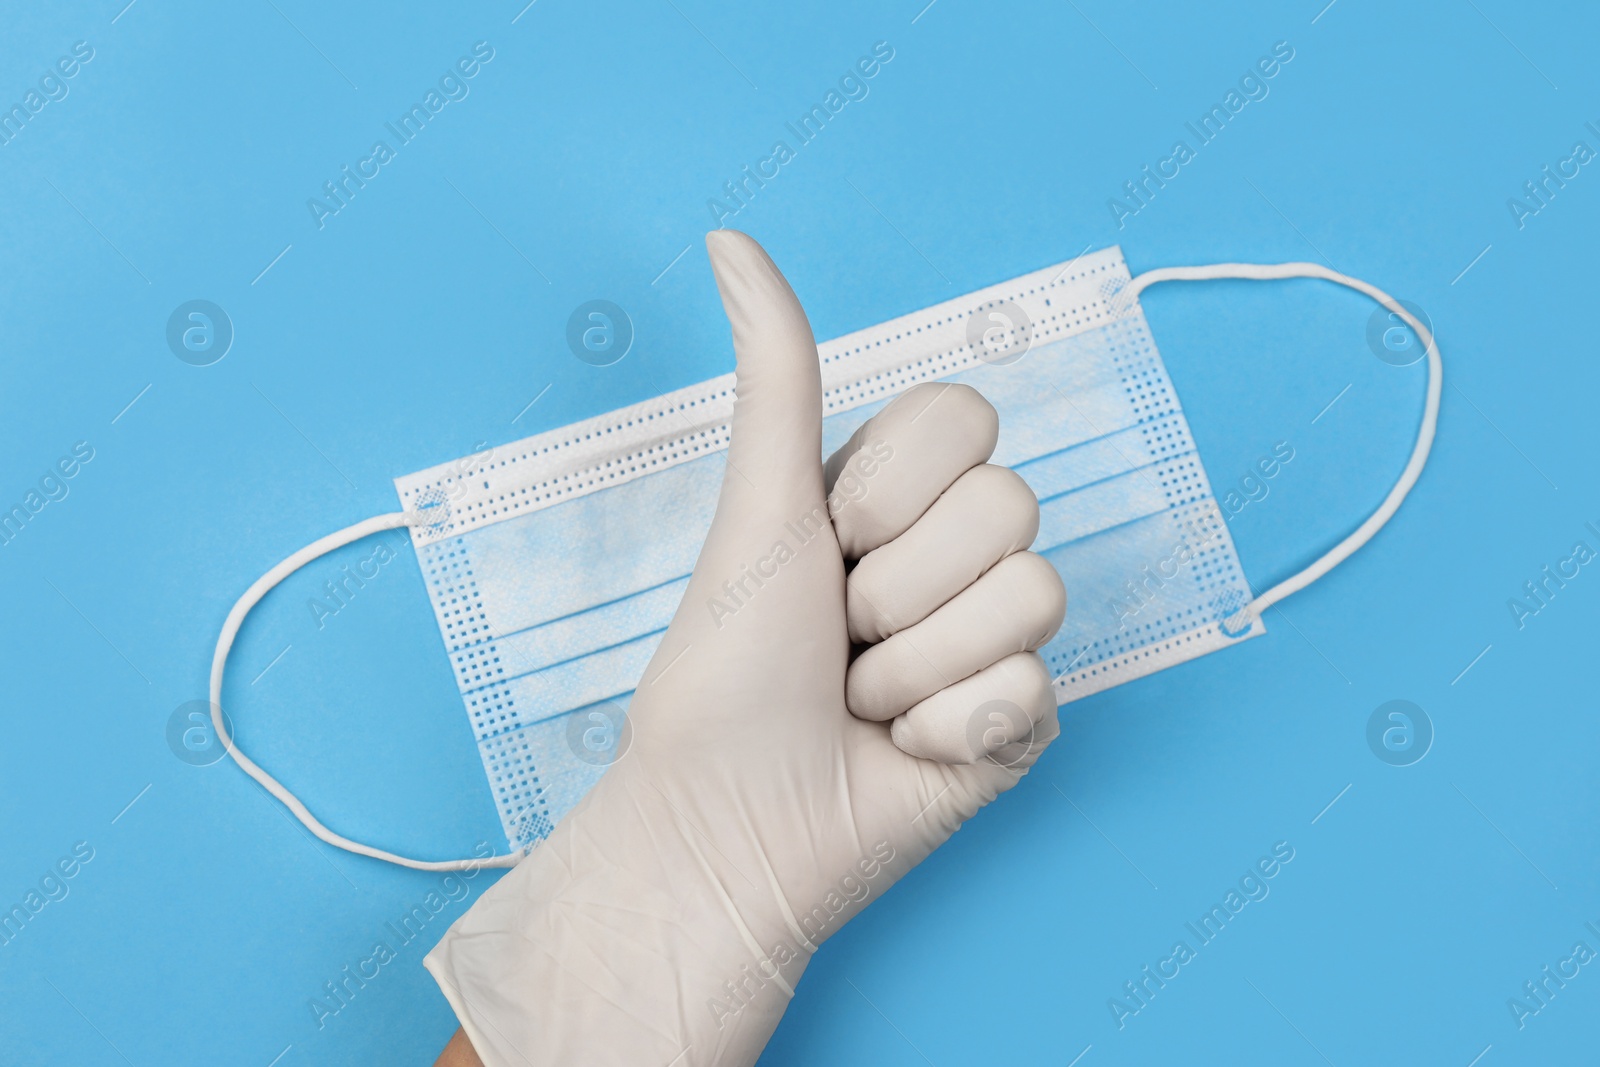 Photo of Doctor in medical gloves showing thumb up gesture near protective mask on light blue background, top view